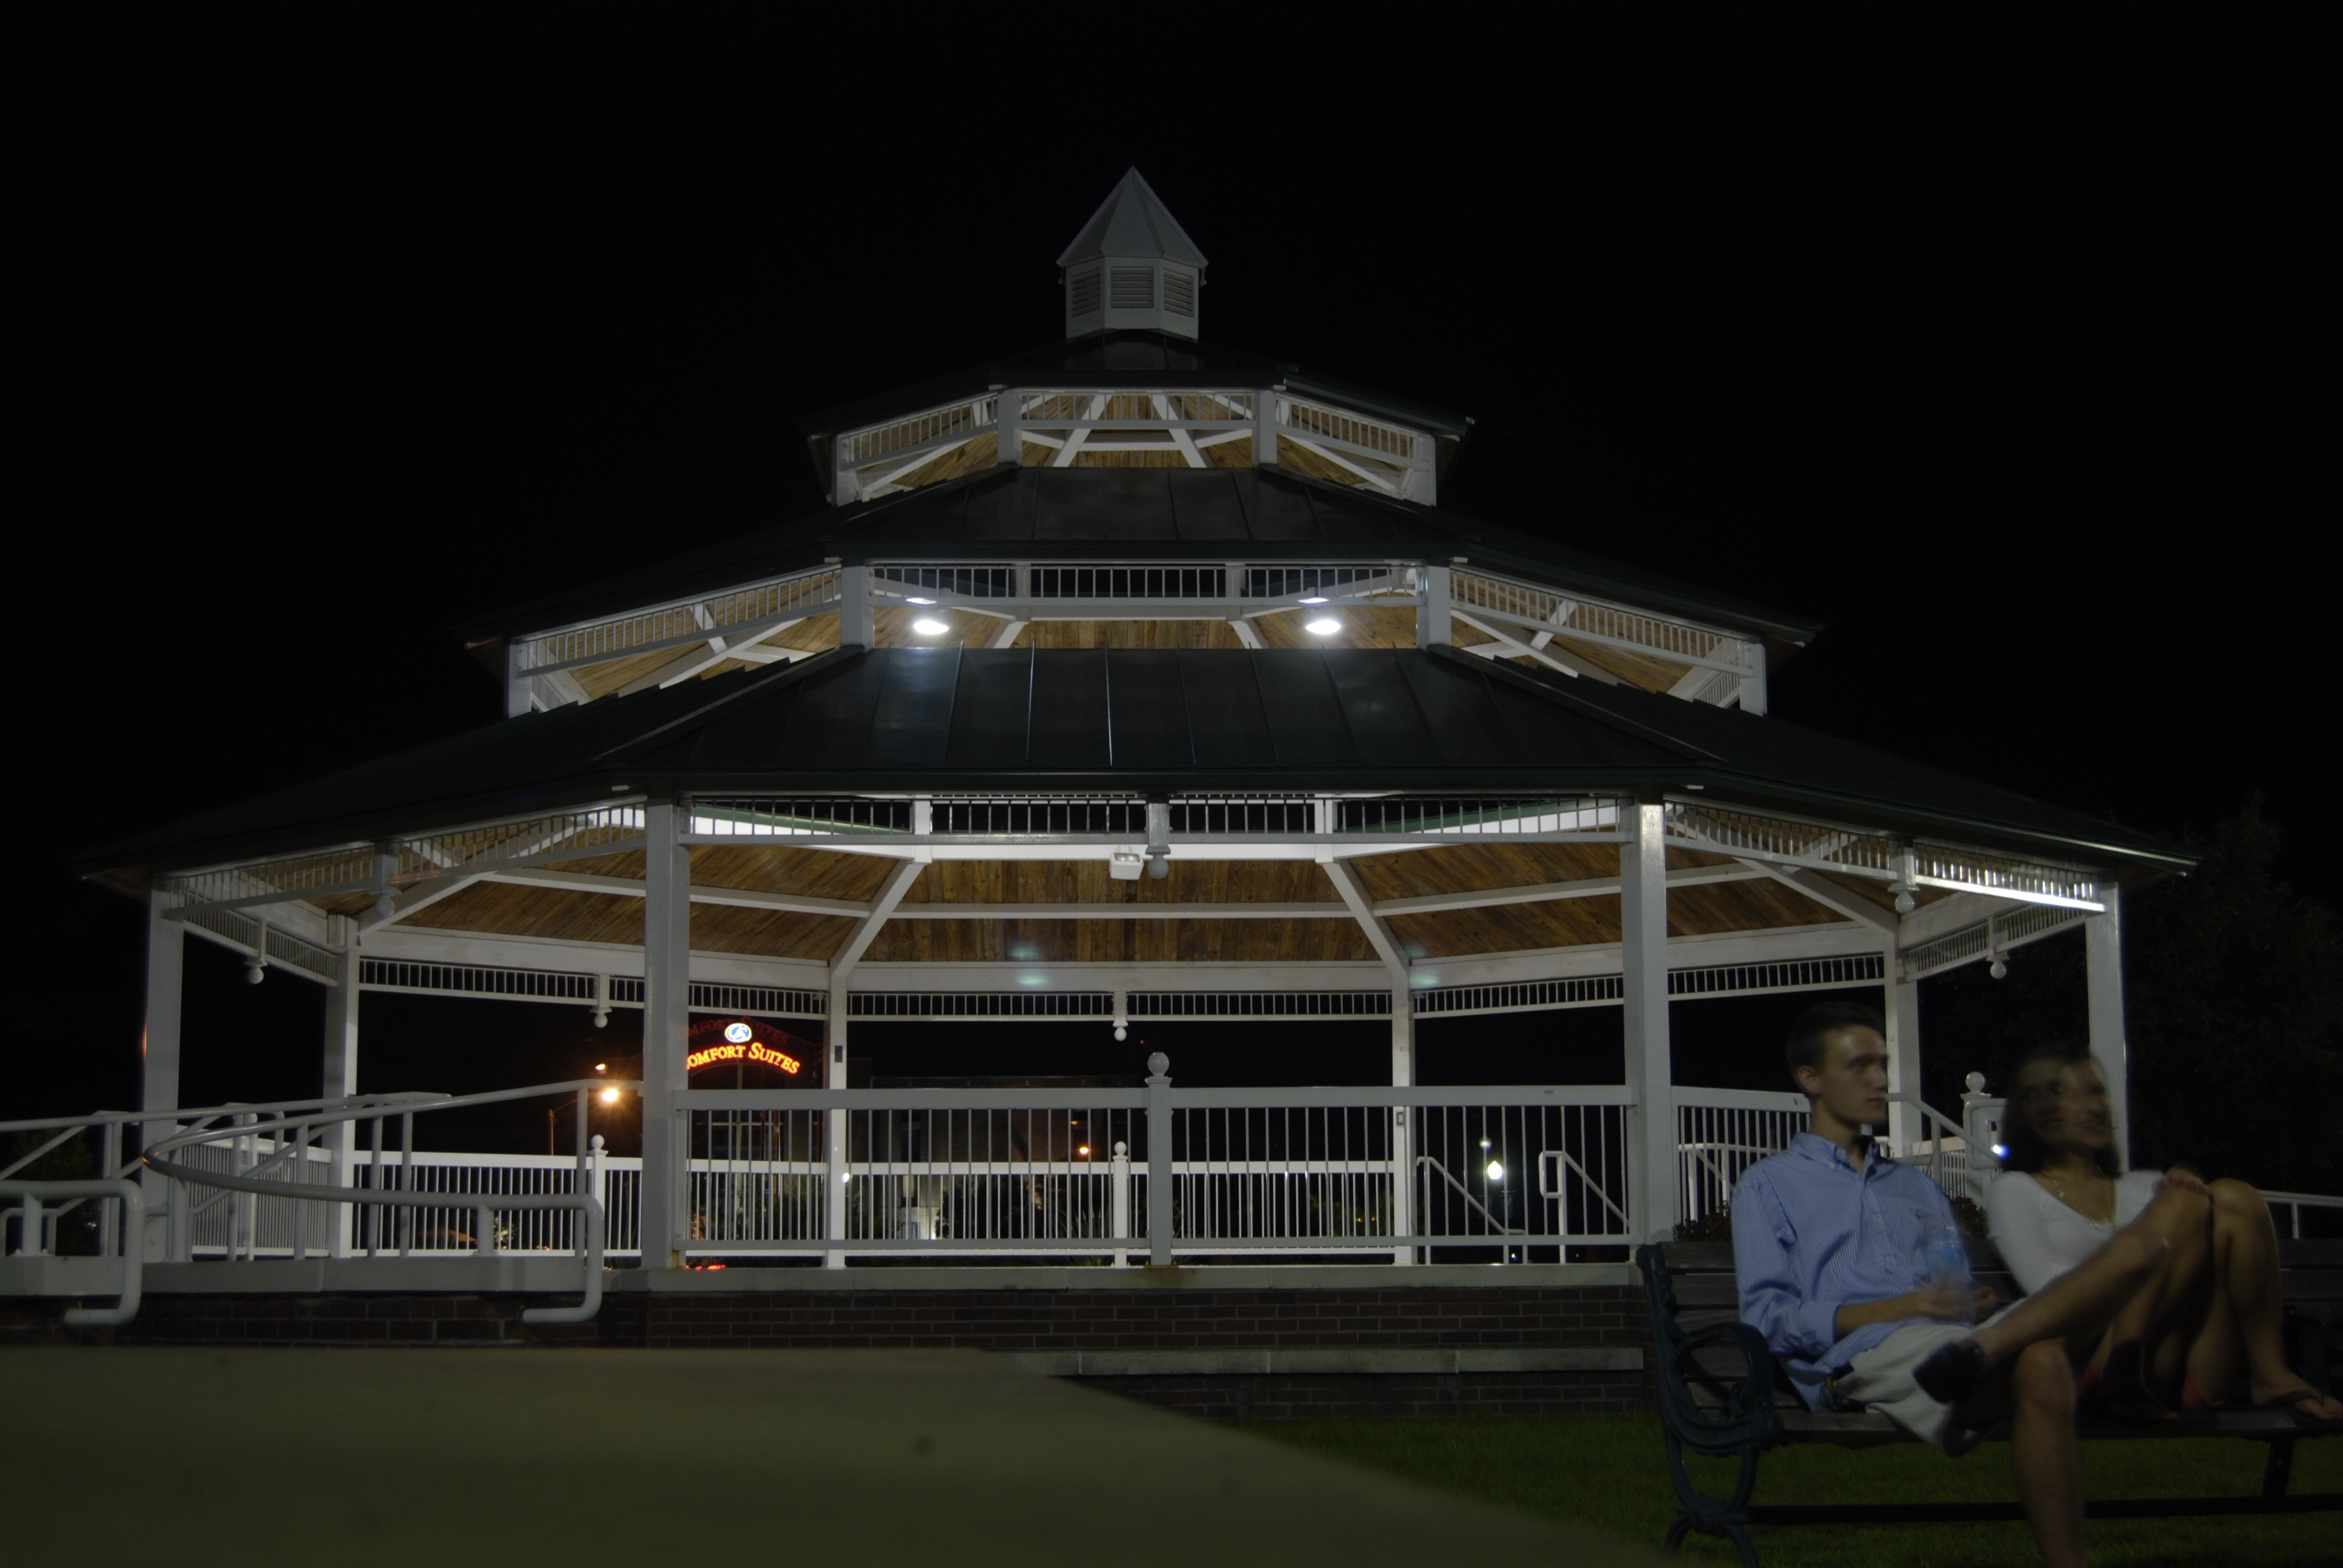 New Bern's Gazebo at Night--This is a beautiful and popular place for weddings and for just hanging out.